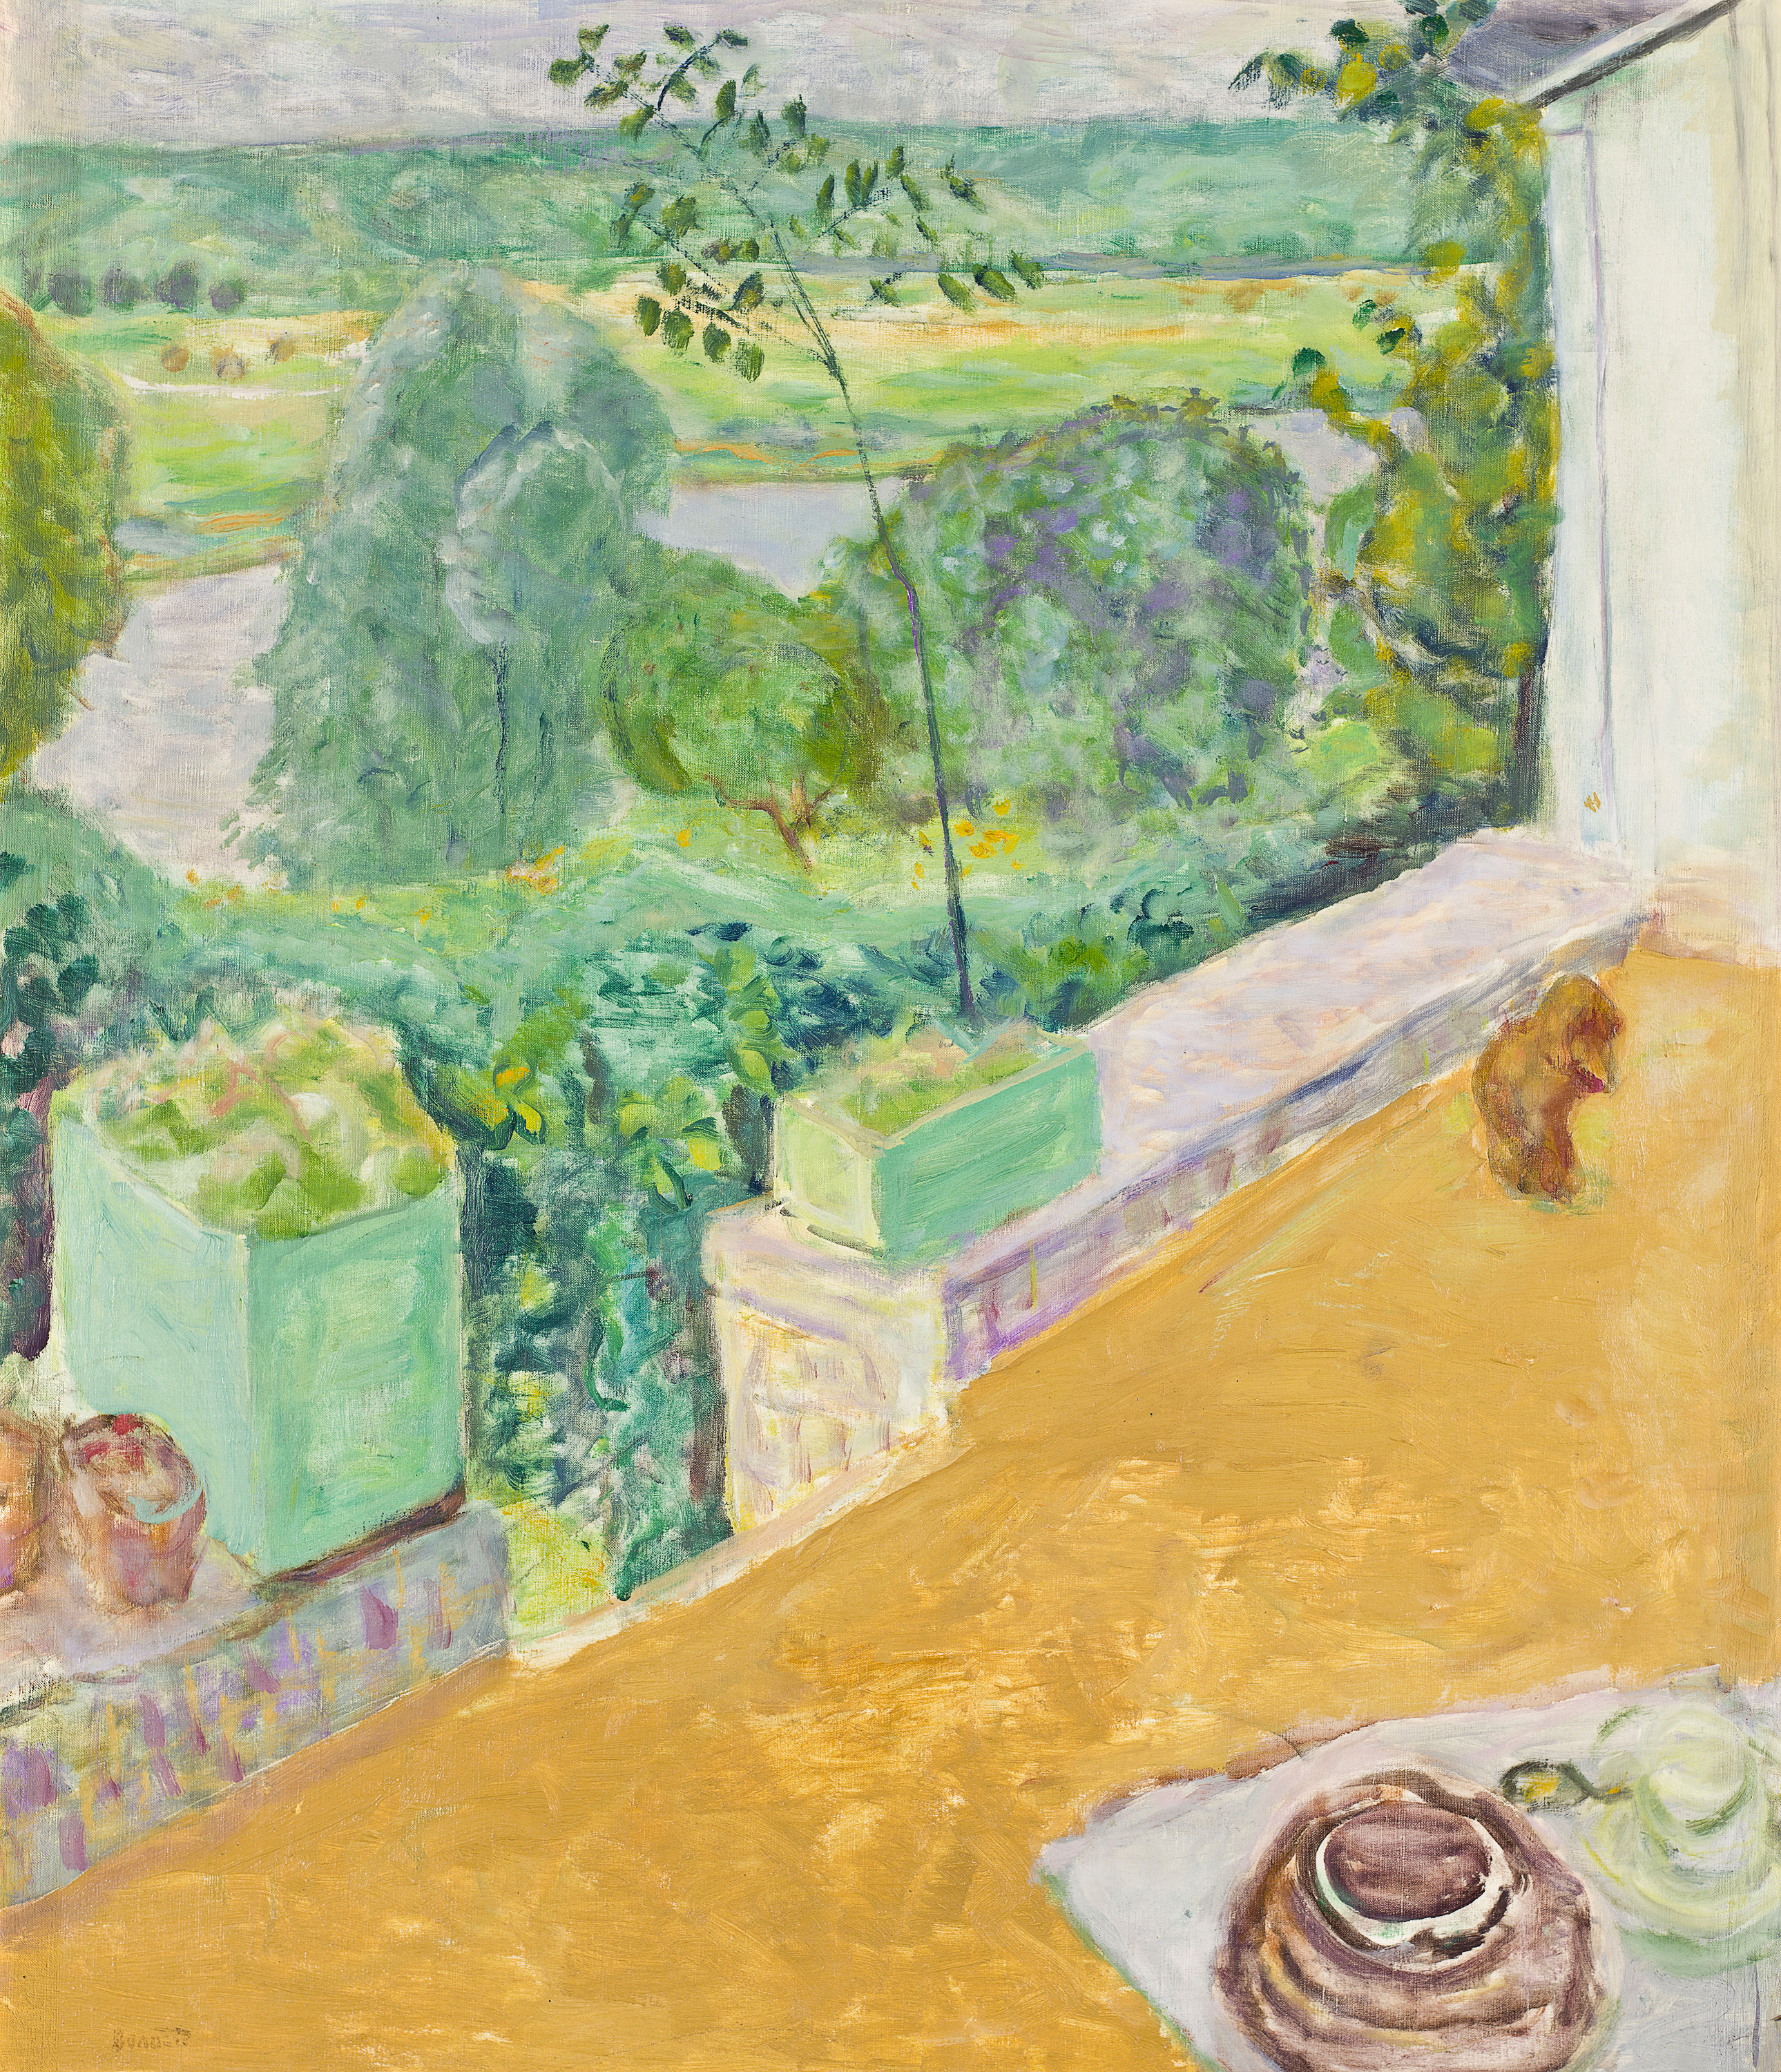 An oil painting of a landscape seen from a terrace. On the terrace is a small dog.